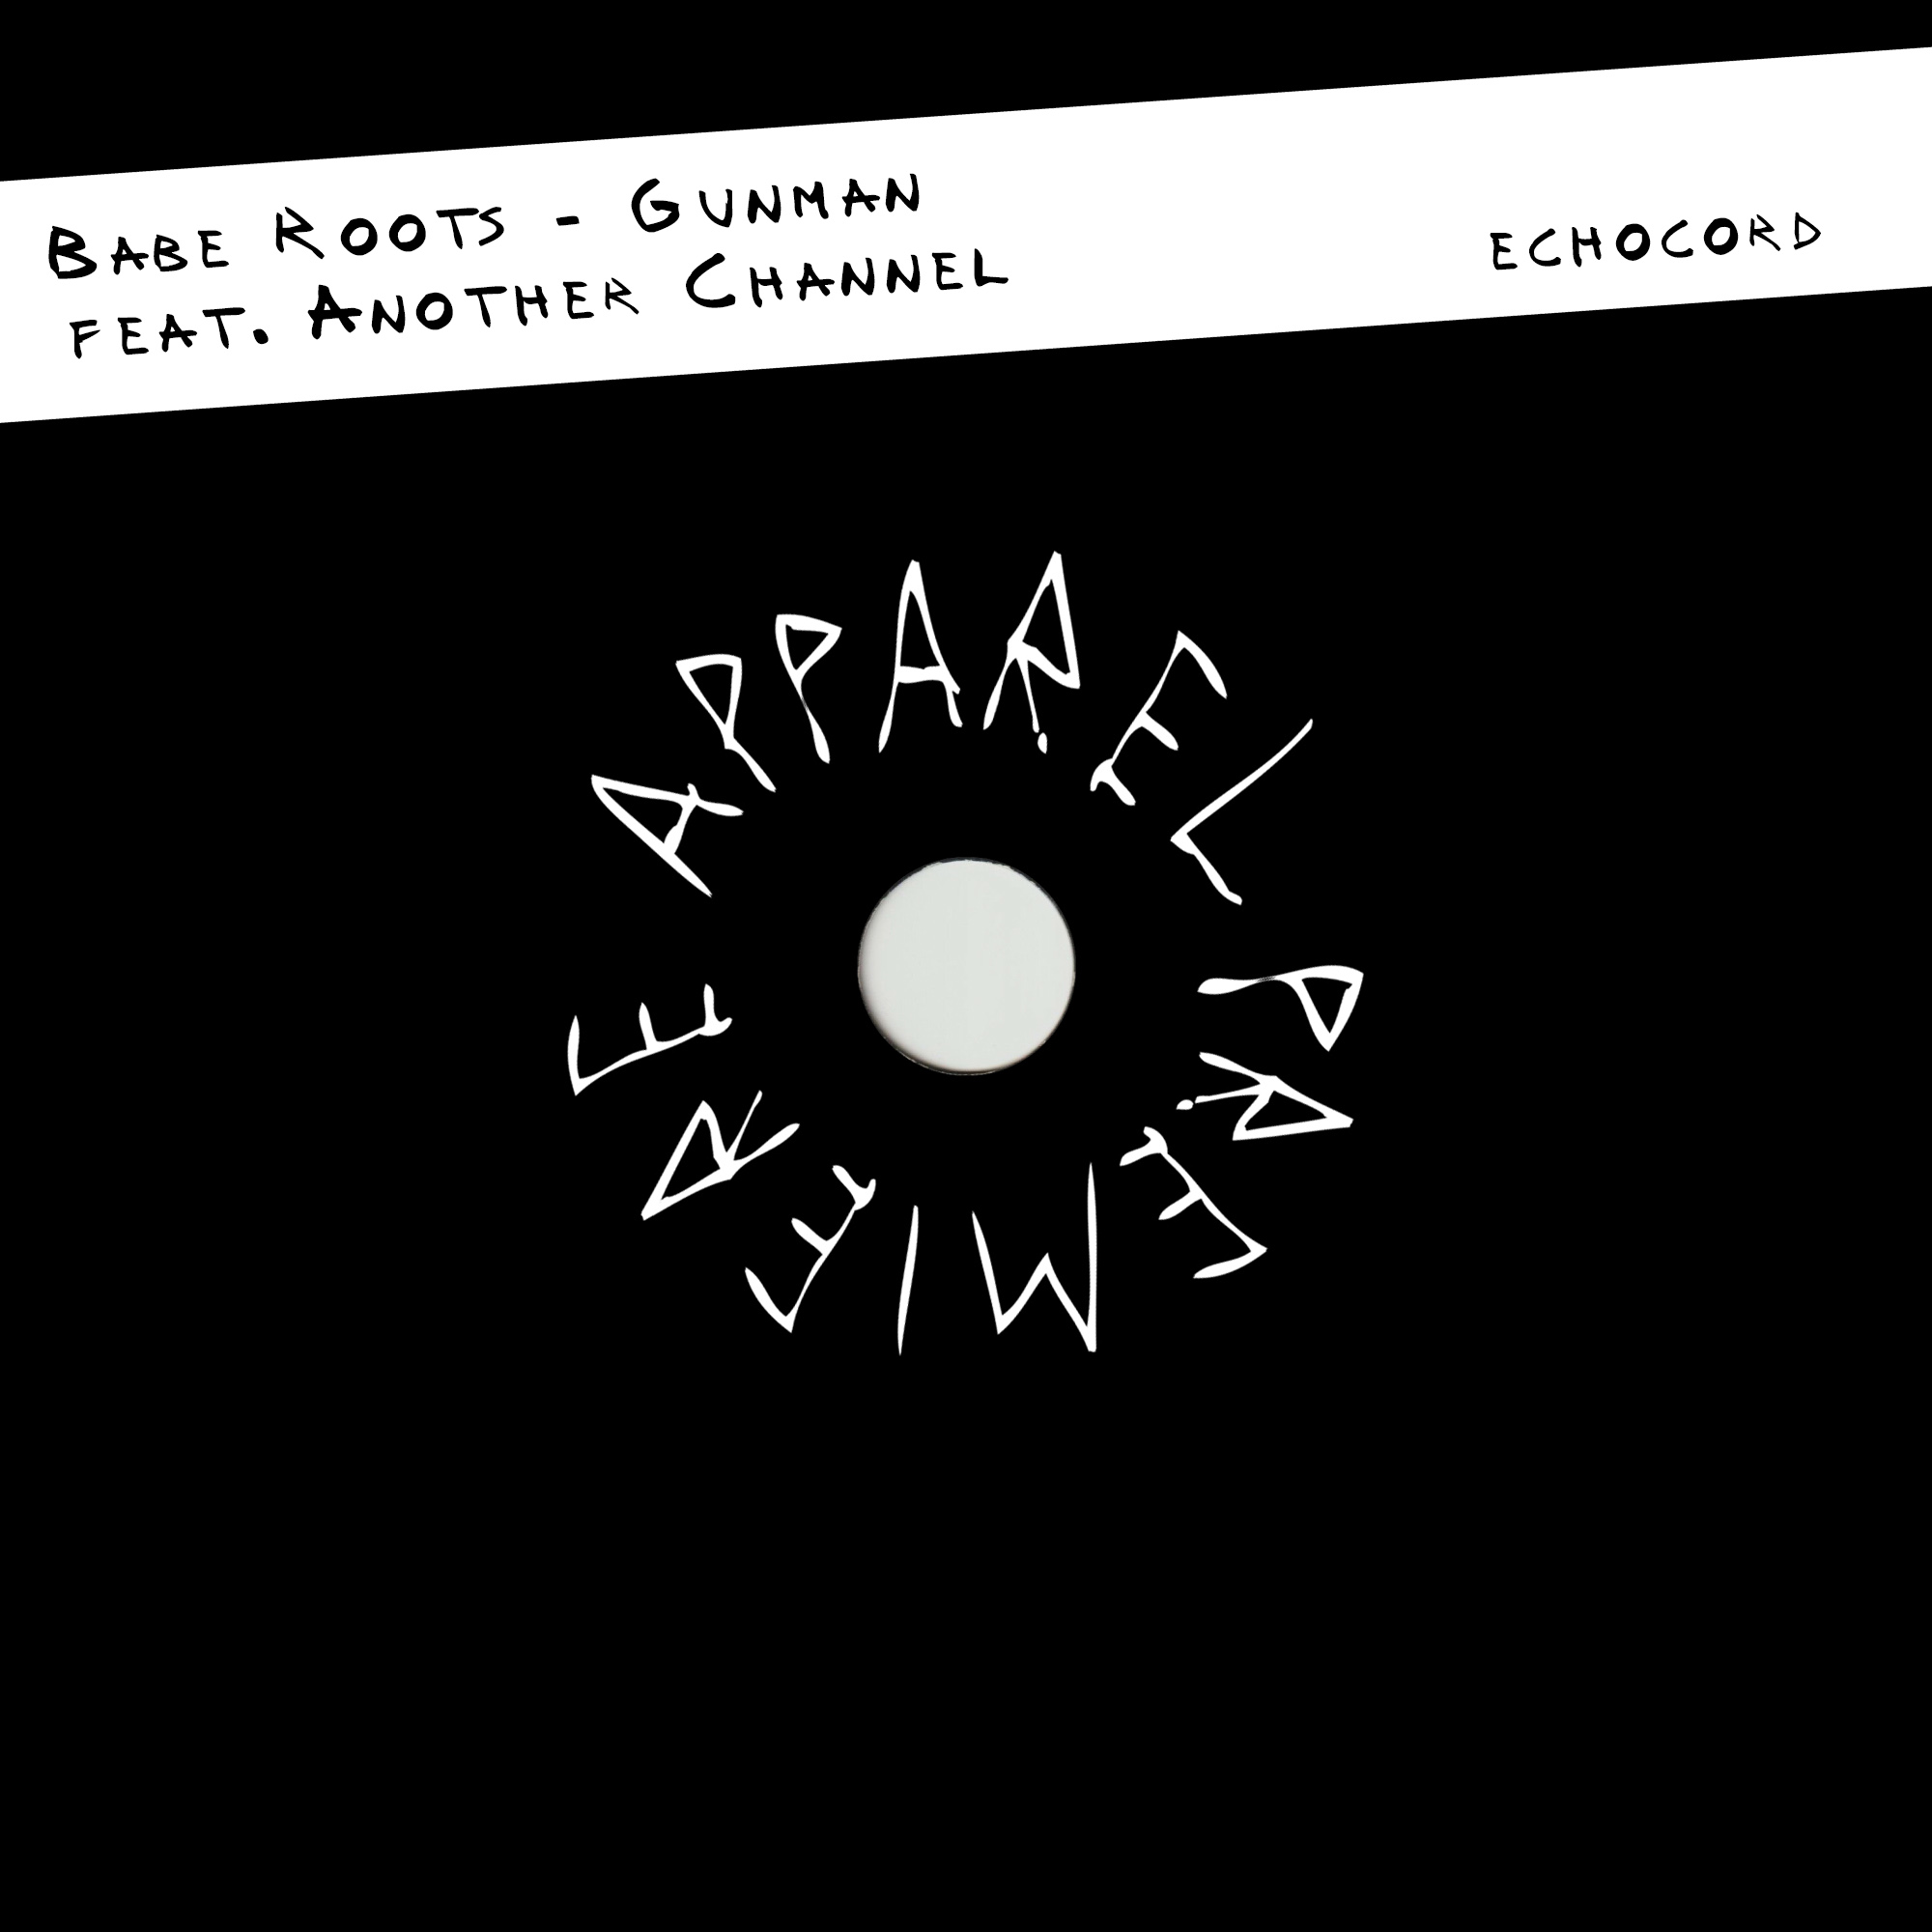 APPAREL PREMIERE Babe Roots – Gunman feat. Another Channel [Echocord]